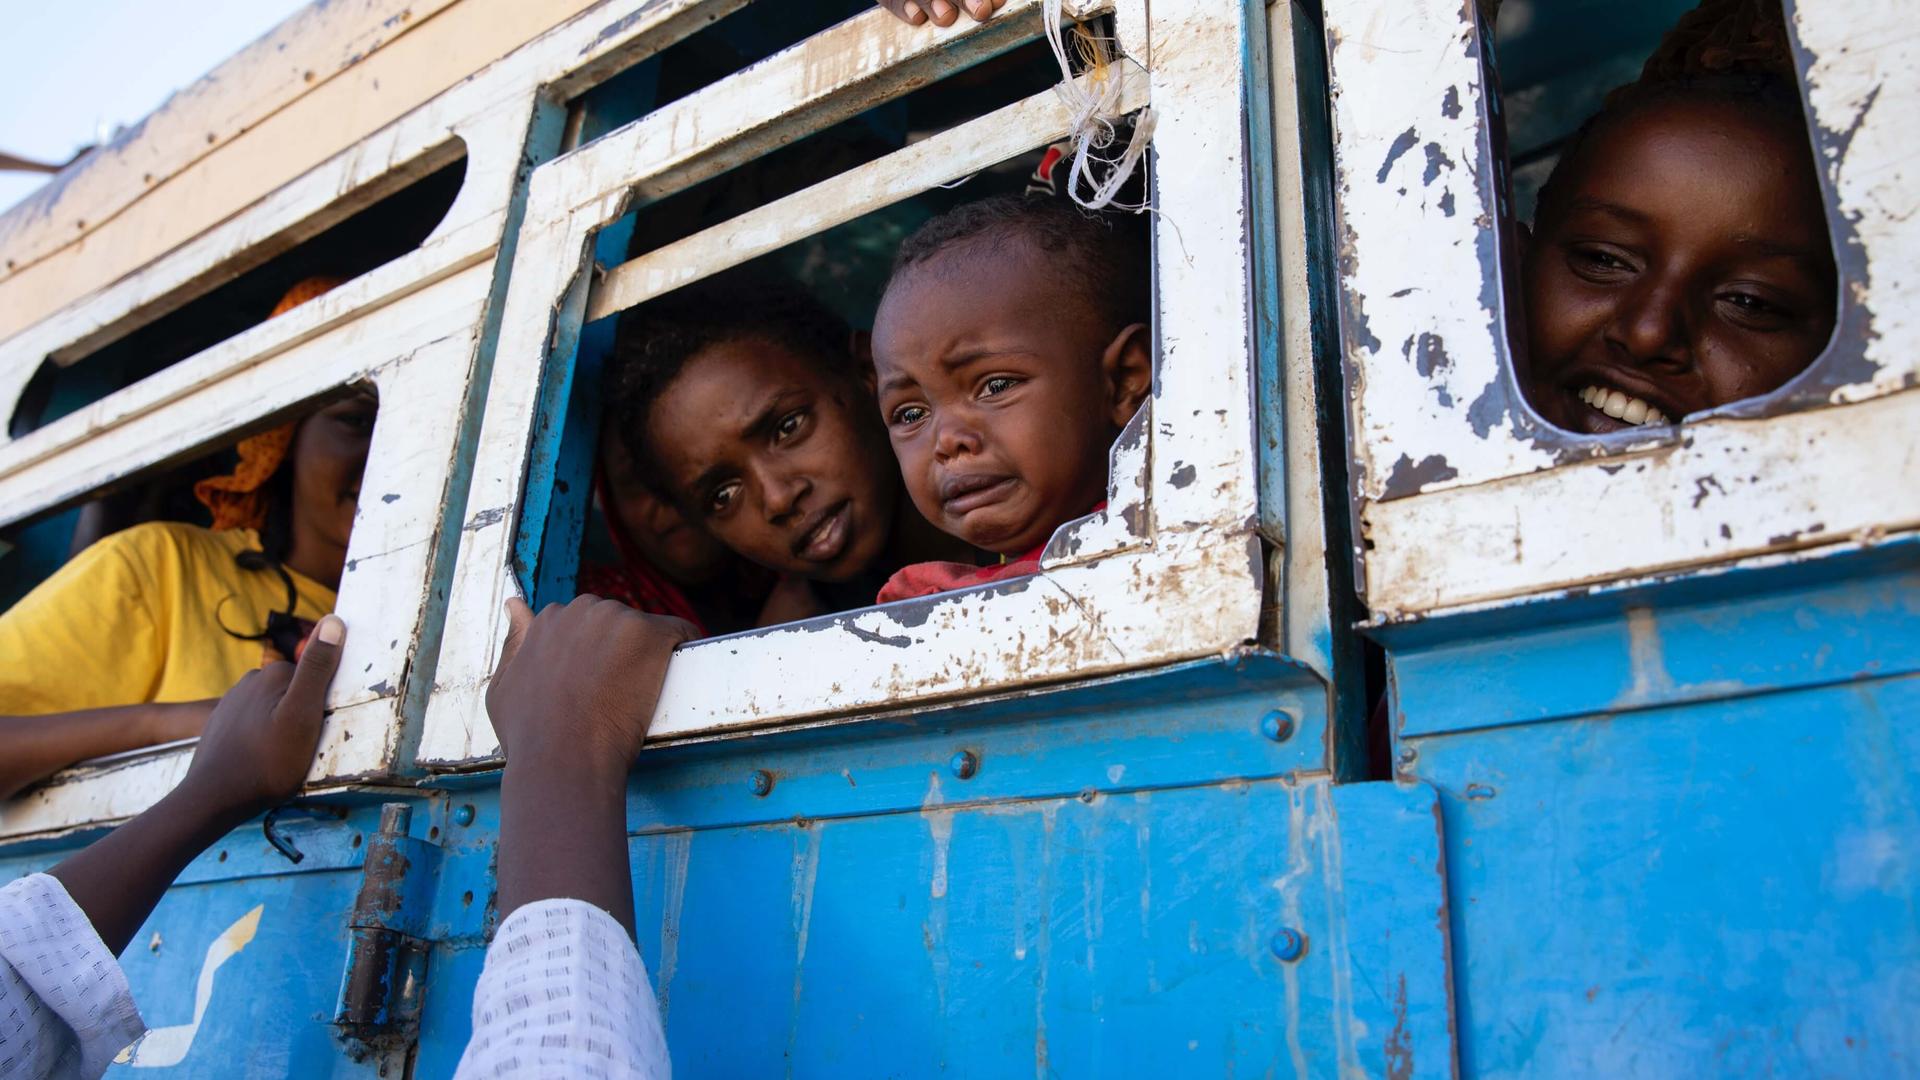 Three Ethiopian travelers sit inside a blue bus with white-bordered windows, saying goodbye to someone whose arms rest on the window frame. 